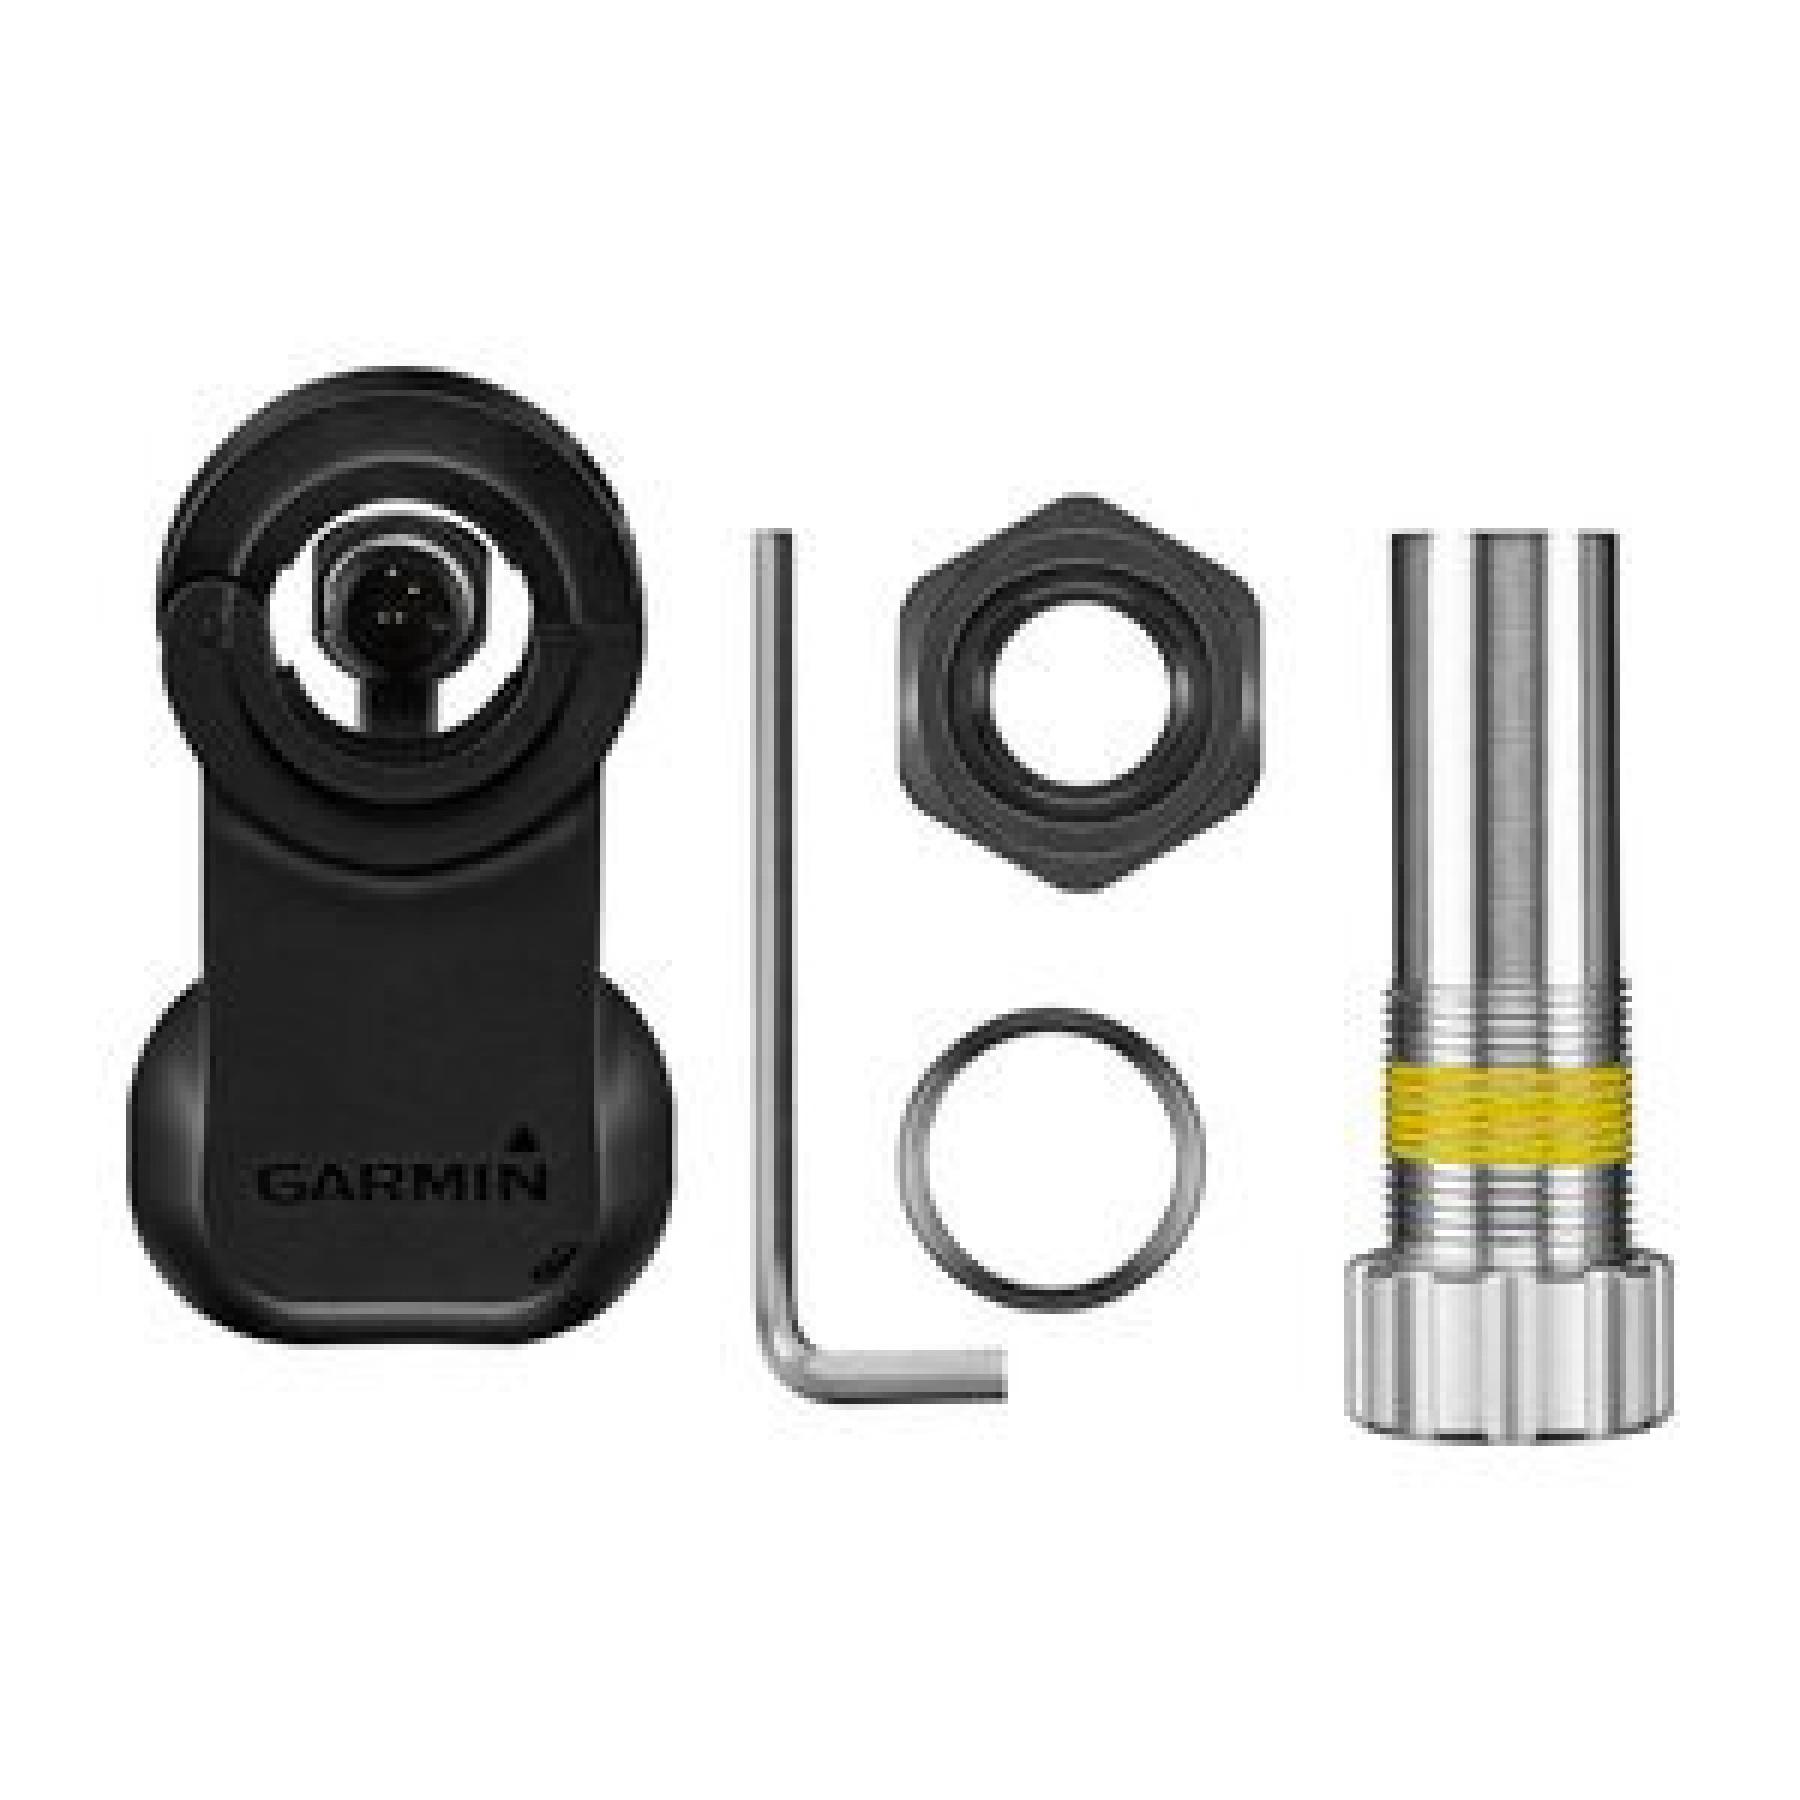 Kit Garmin vector to 2s upgrade kit 15-18 mm thick 44 mm wide